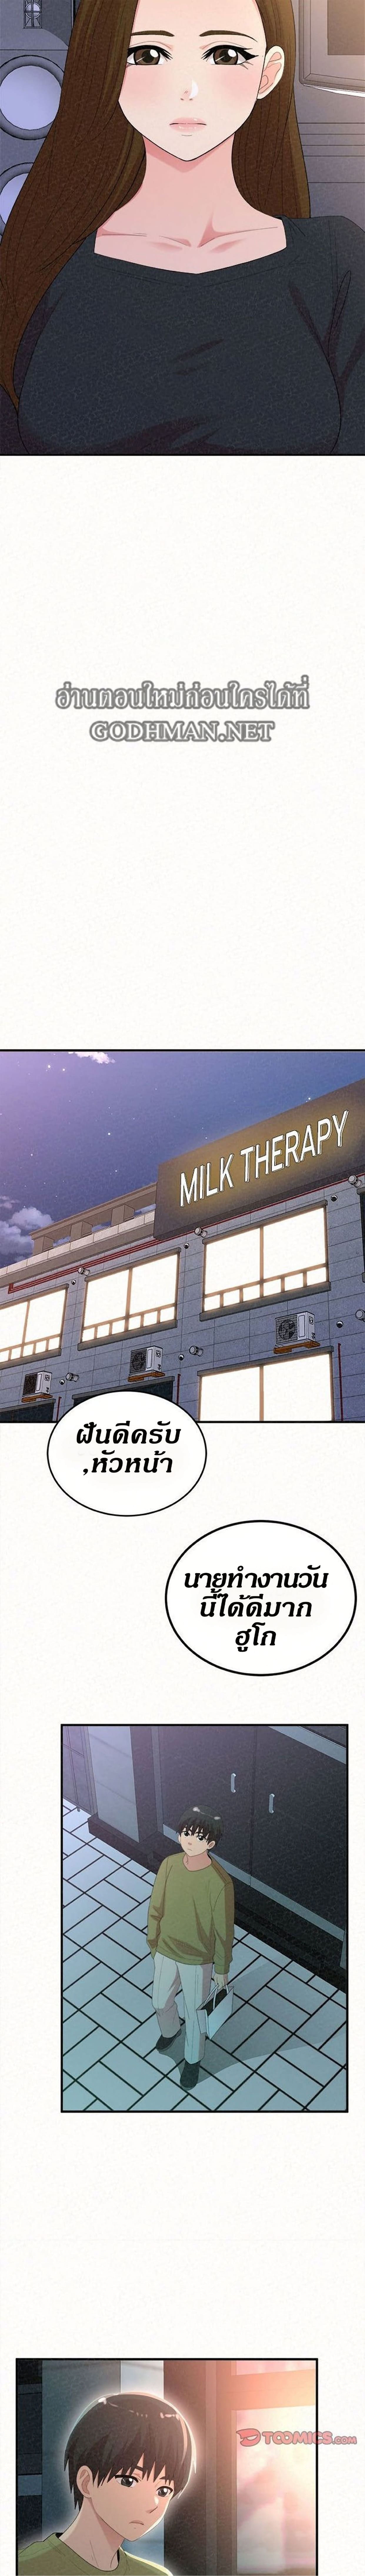 Milk Therapy20